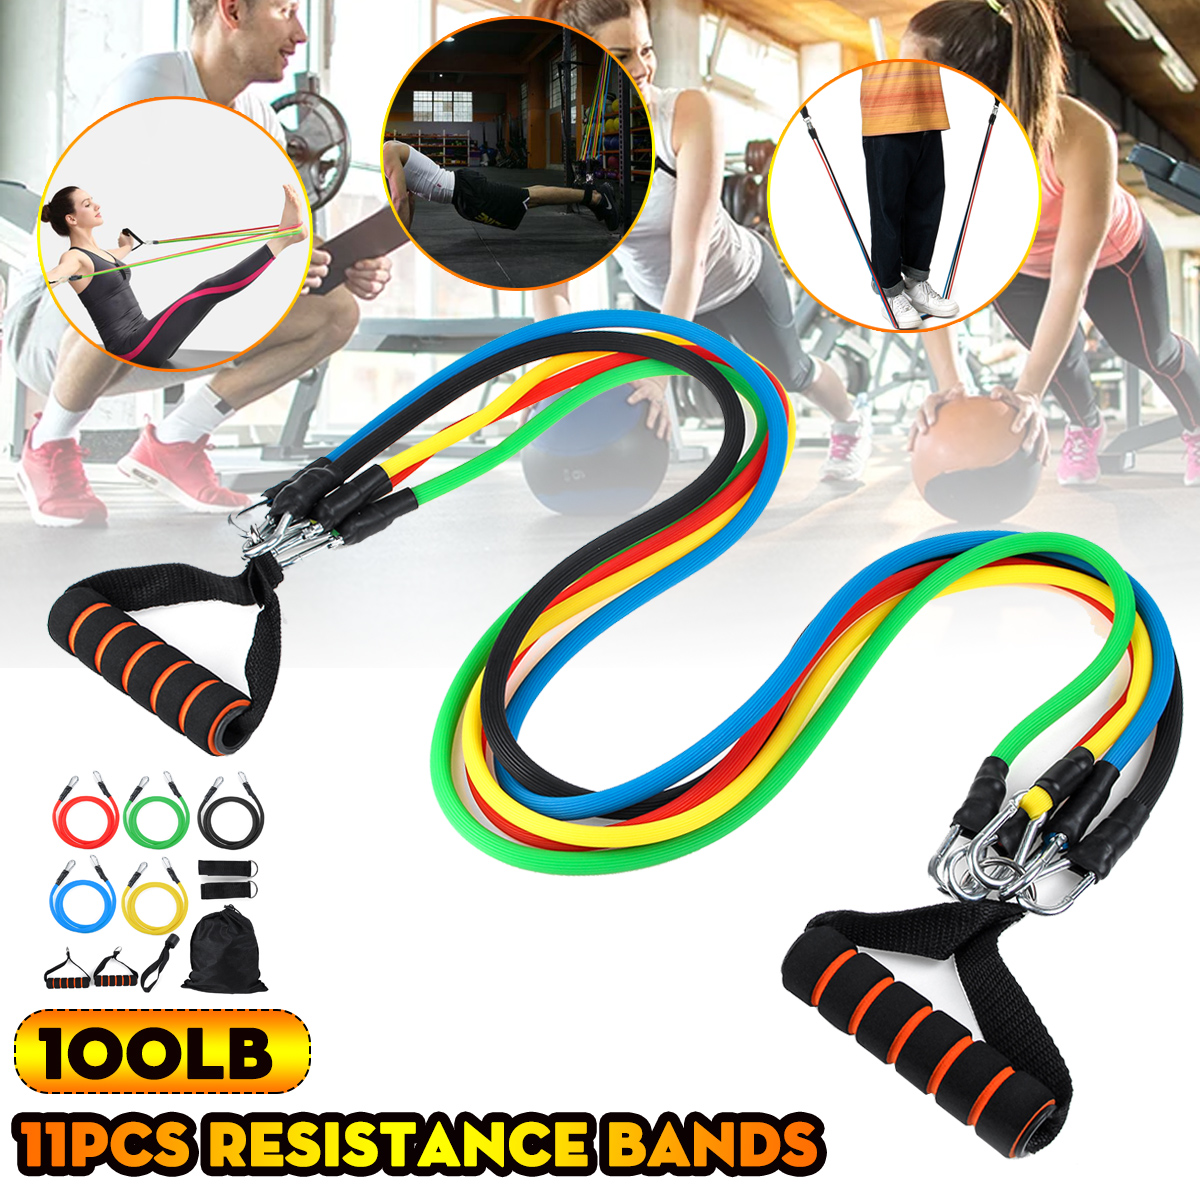 11PCS-Resistance-Bands-Set-Home-Fitness-Exercise-Straps-Gym-Training-Strength-Pull-Tubes-1697116-1